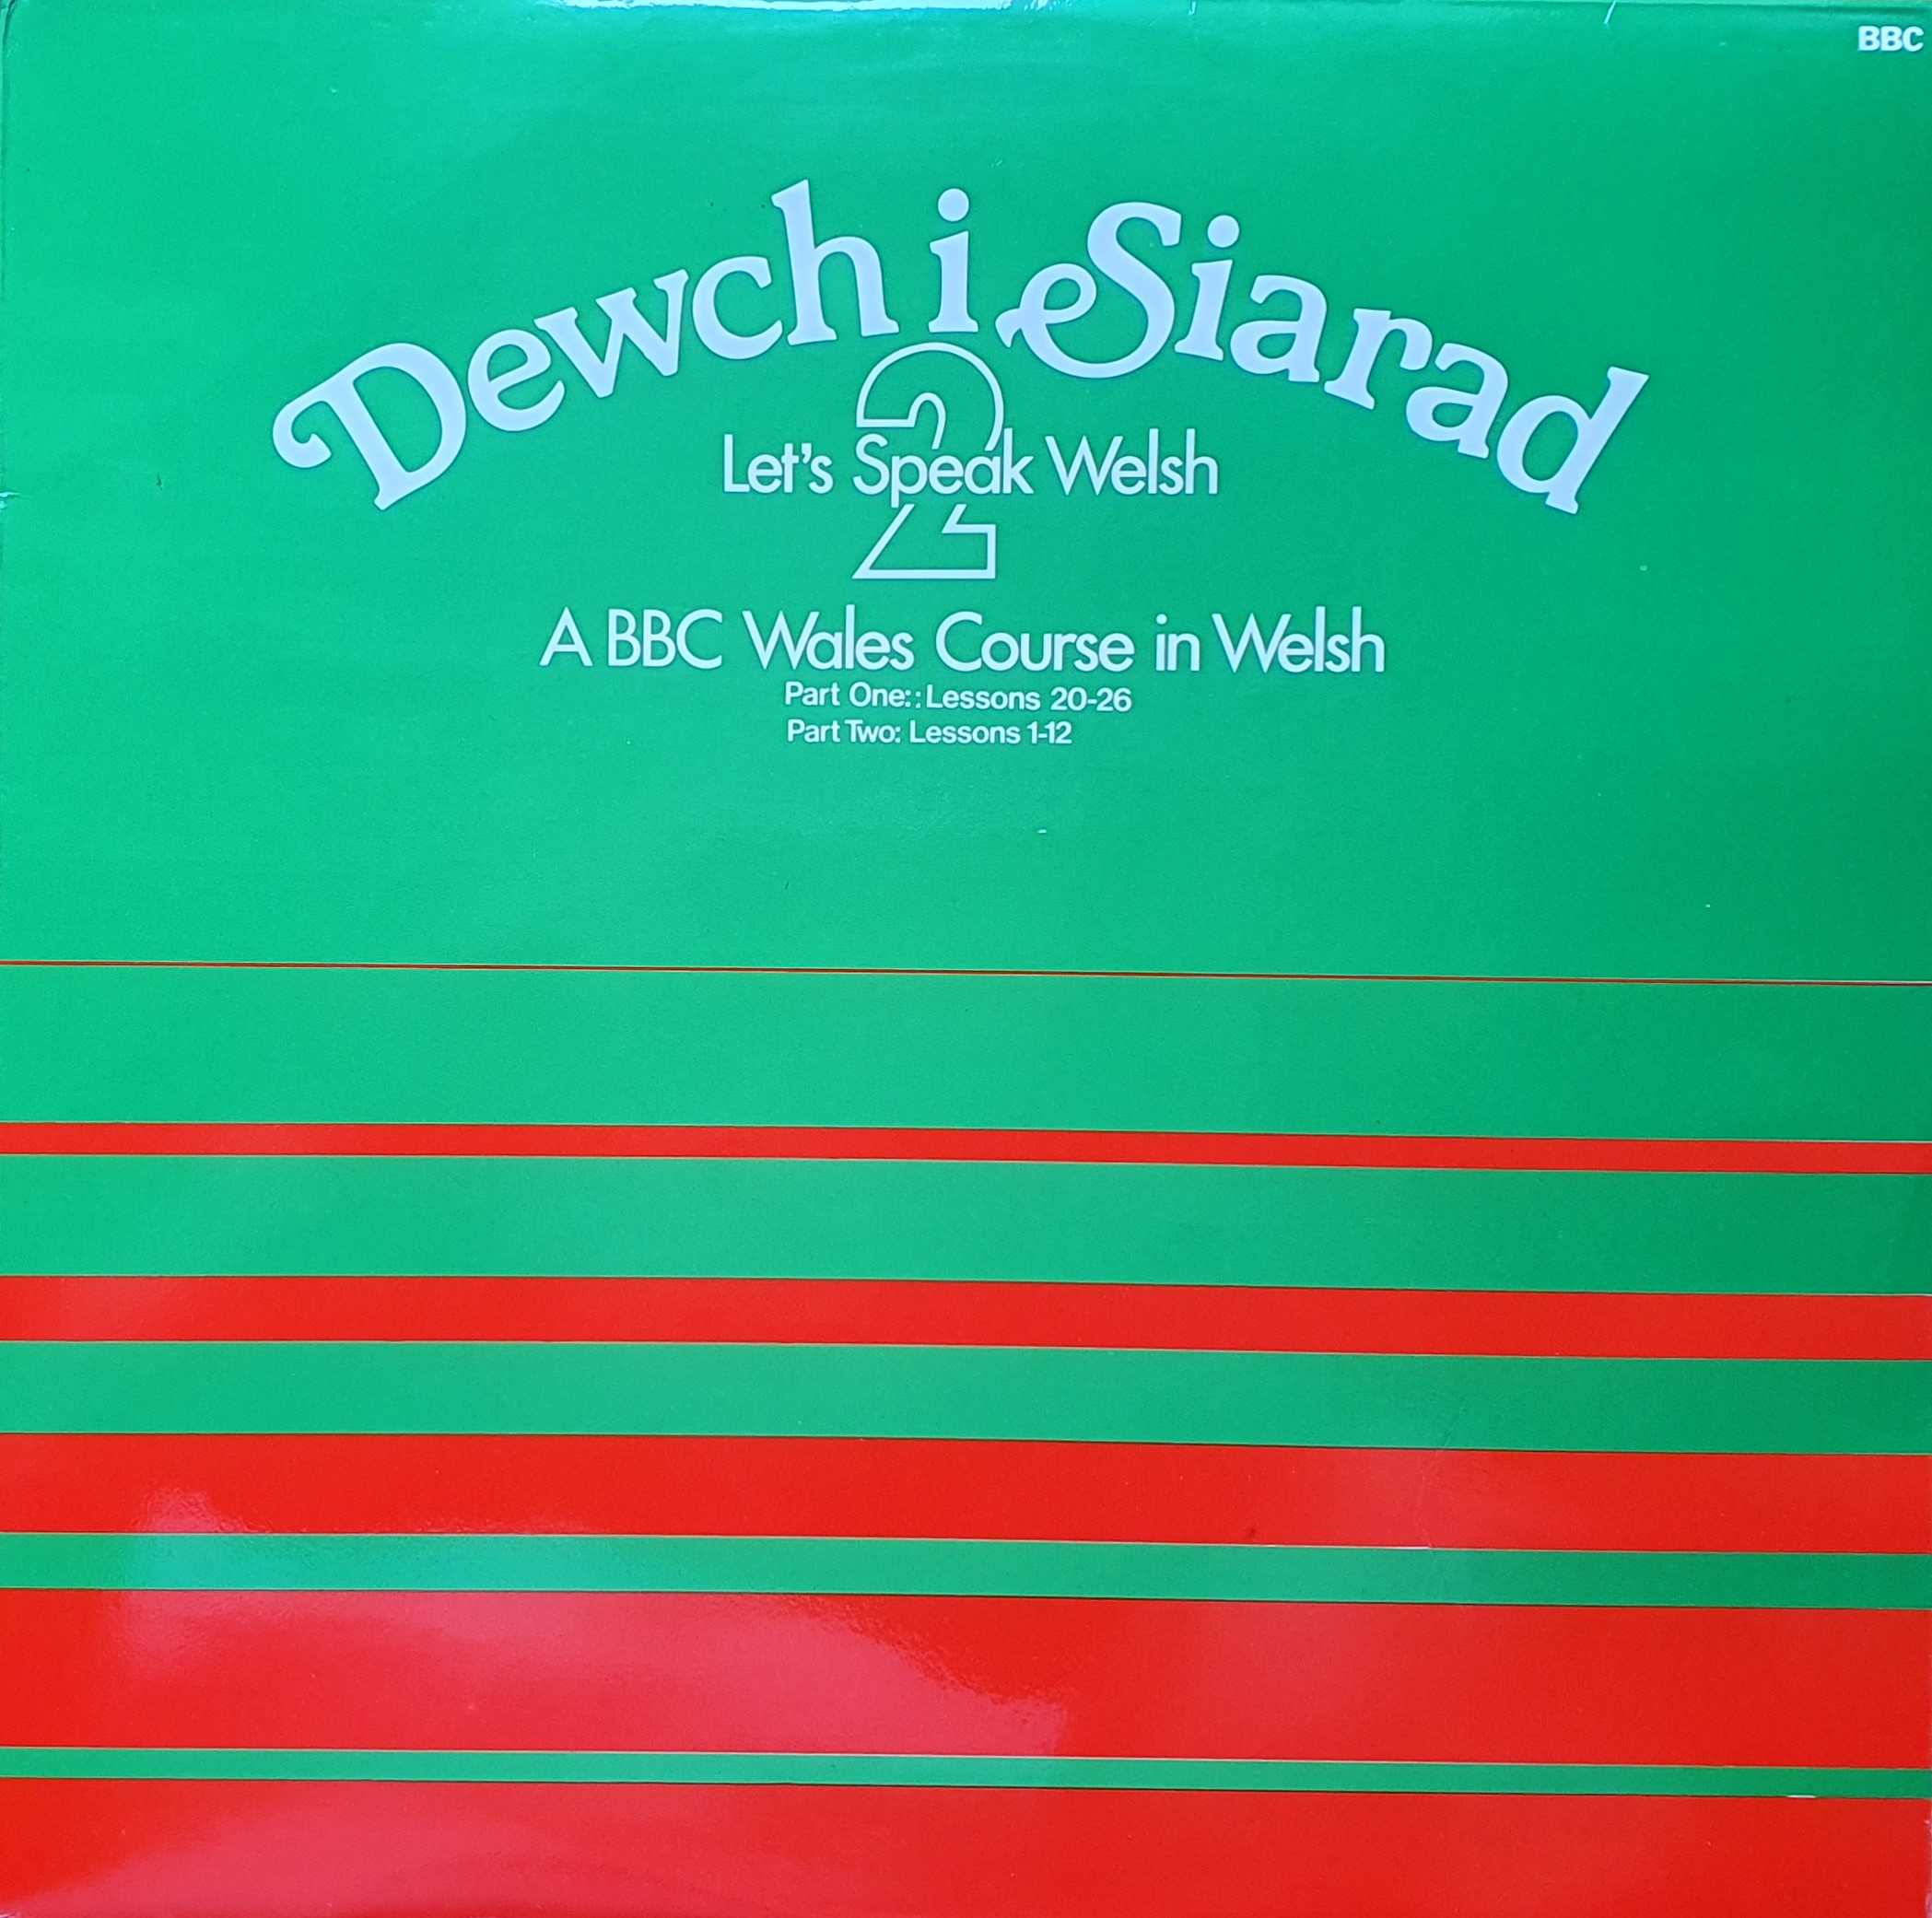 Picture of OP 221 Dewch I Siarad - Lets Speak Welsh 2 by artist Bernard Evans from the BBC albums - Records and Tapes library